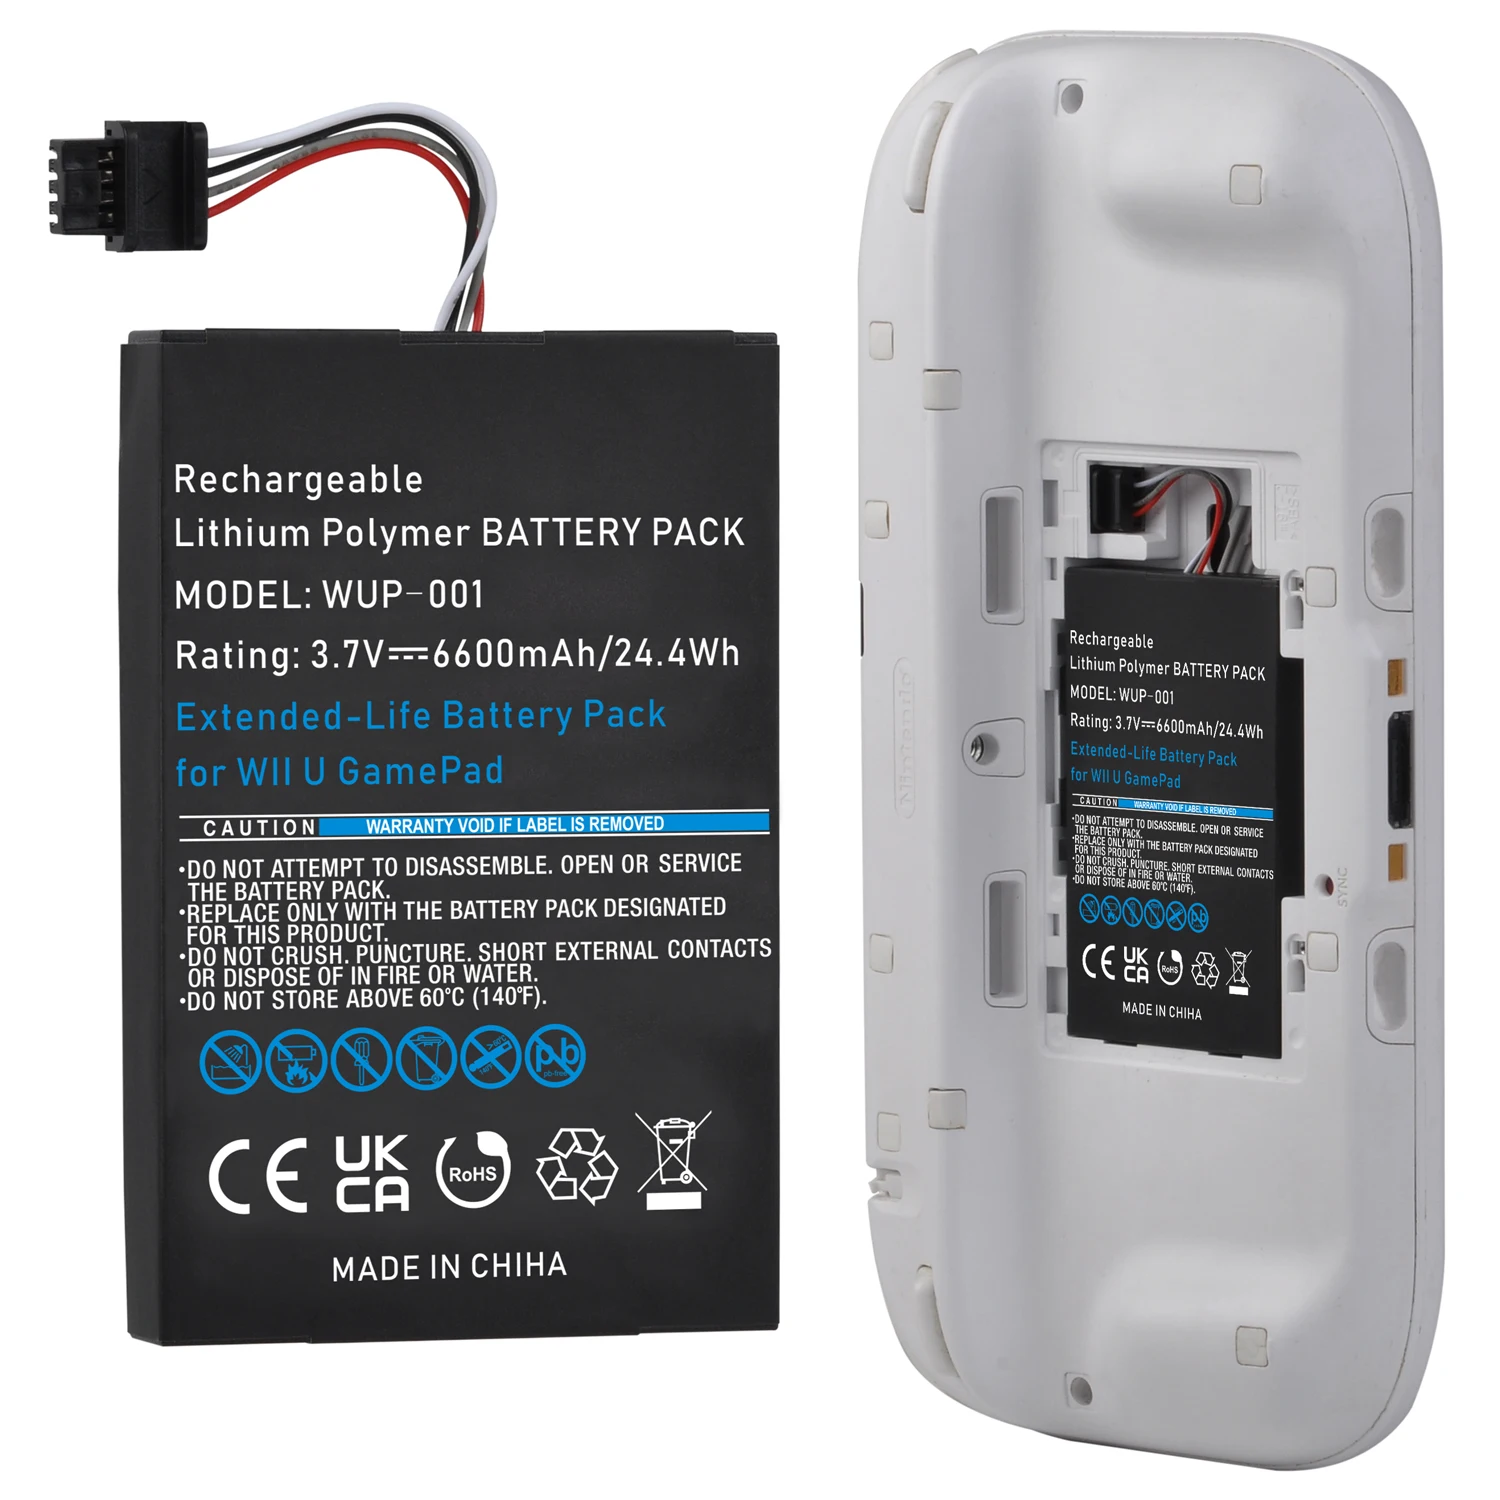 6600mAh Wii U Gamepad Battery Replacement Rechargeable Battery Pack for Nintendo Wii U Gamepad images - 6